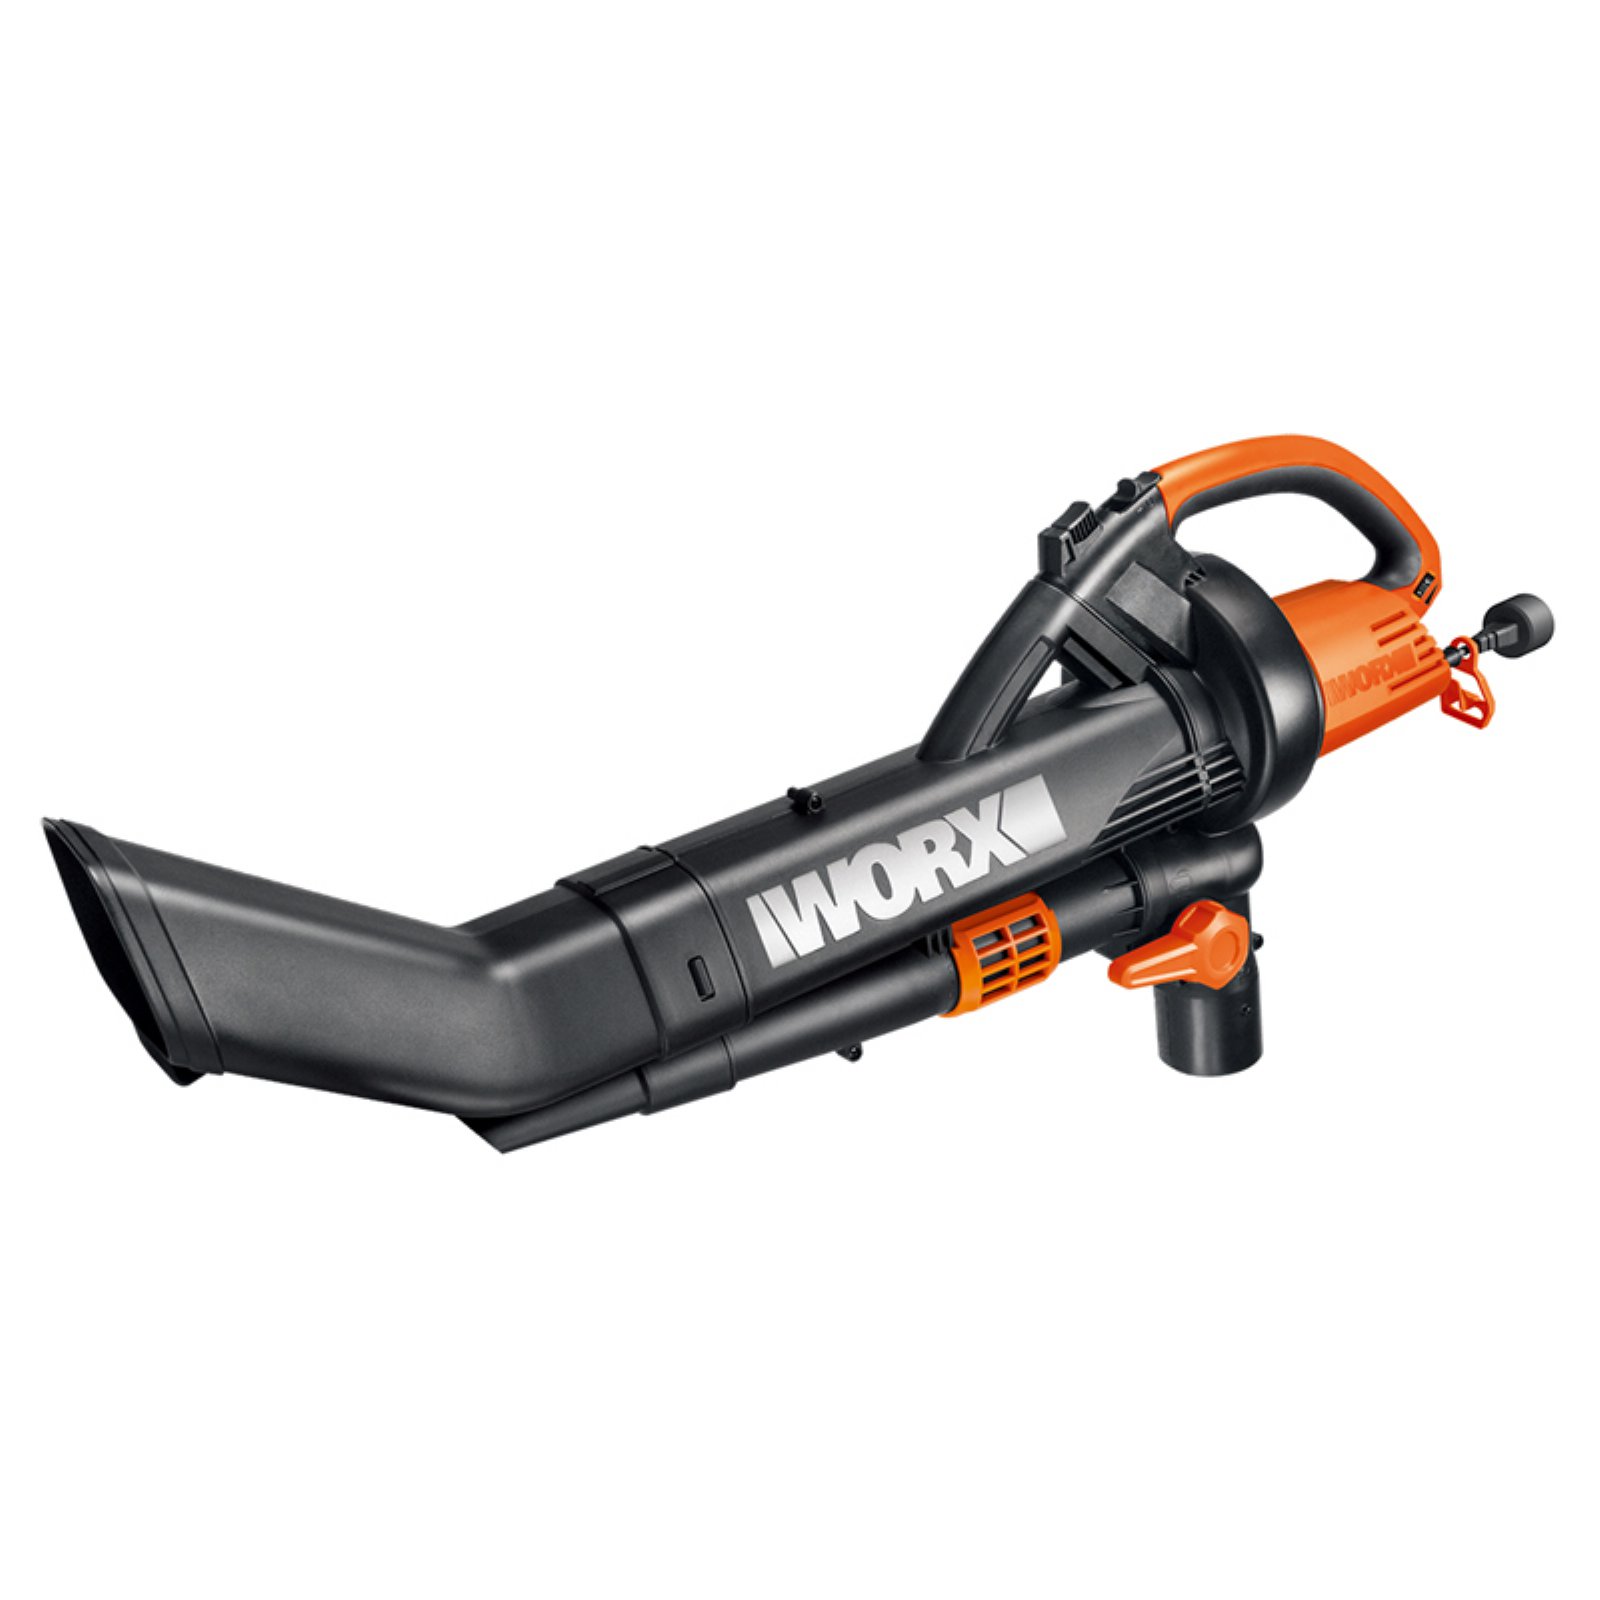 Worx TriVac Blower / Mulcher / Vacuum with All-Metal Mulching System - image 3 of 9